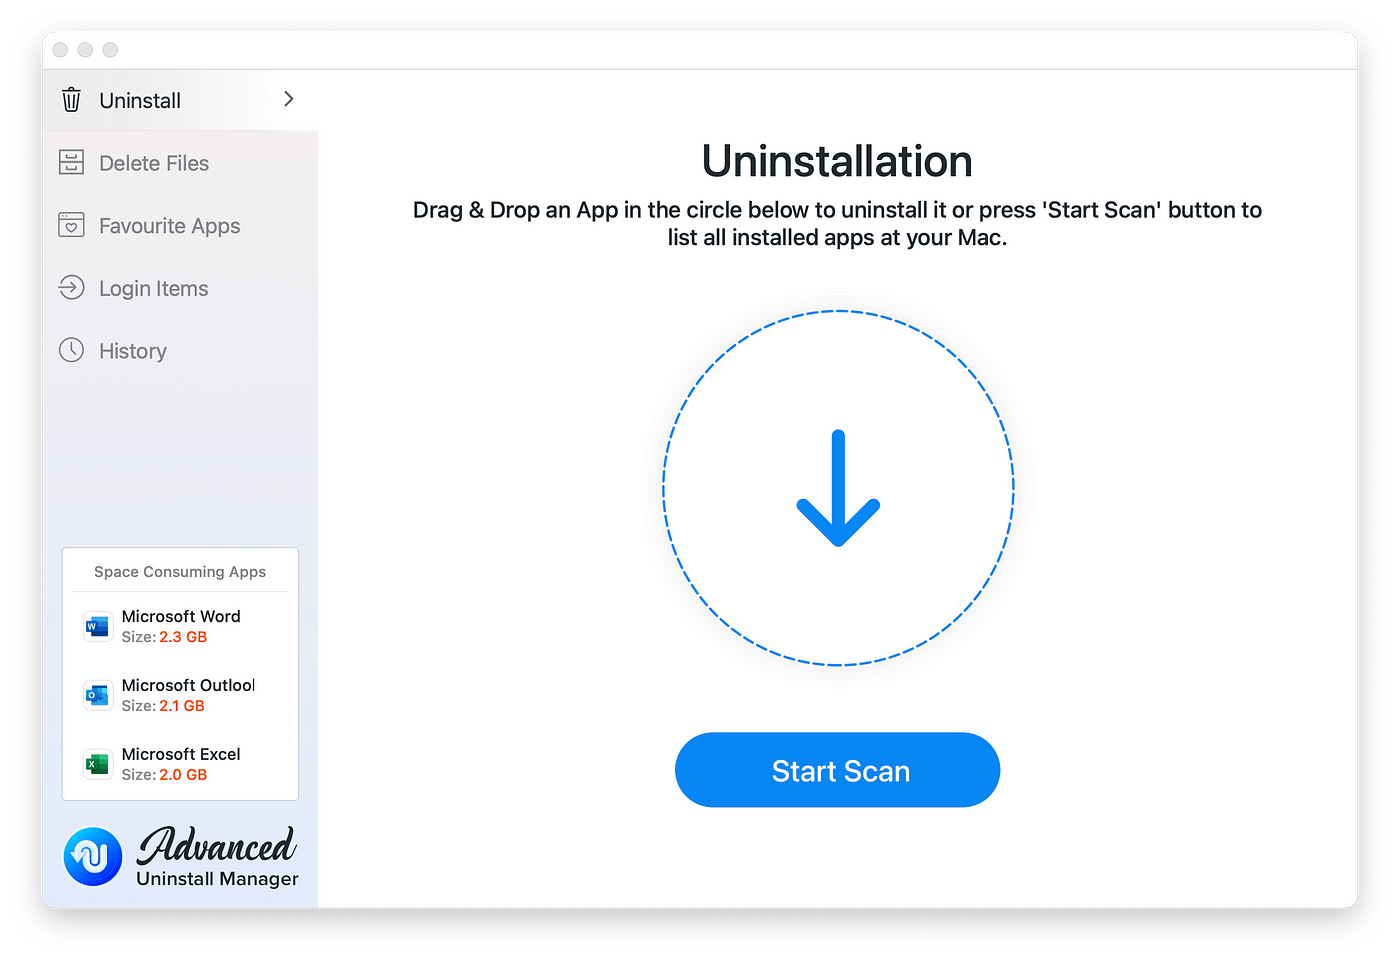 Advanced Uninstall Manager